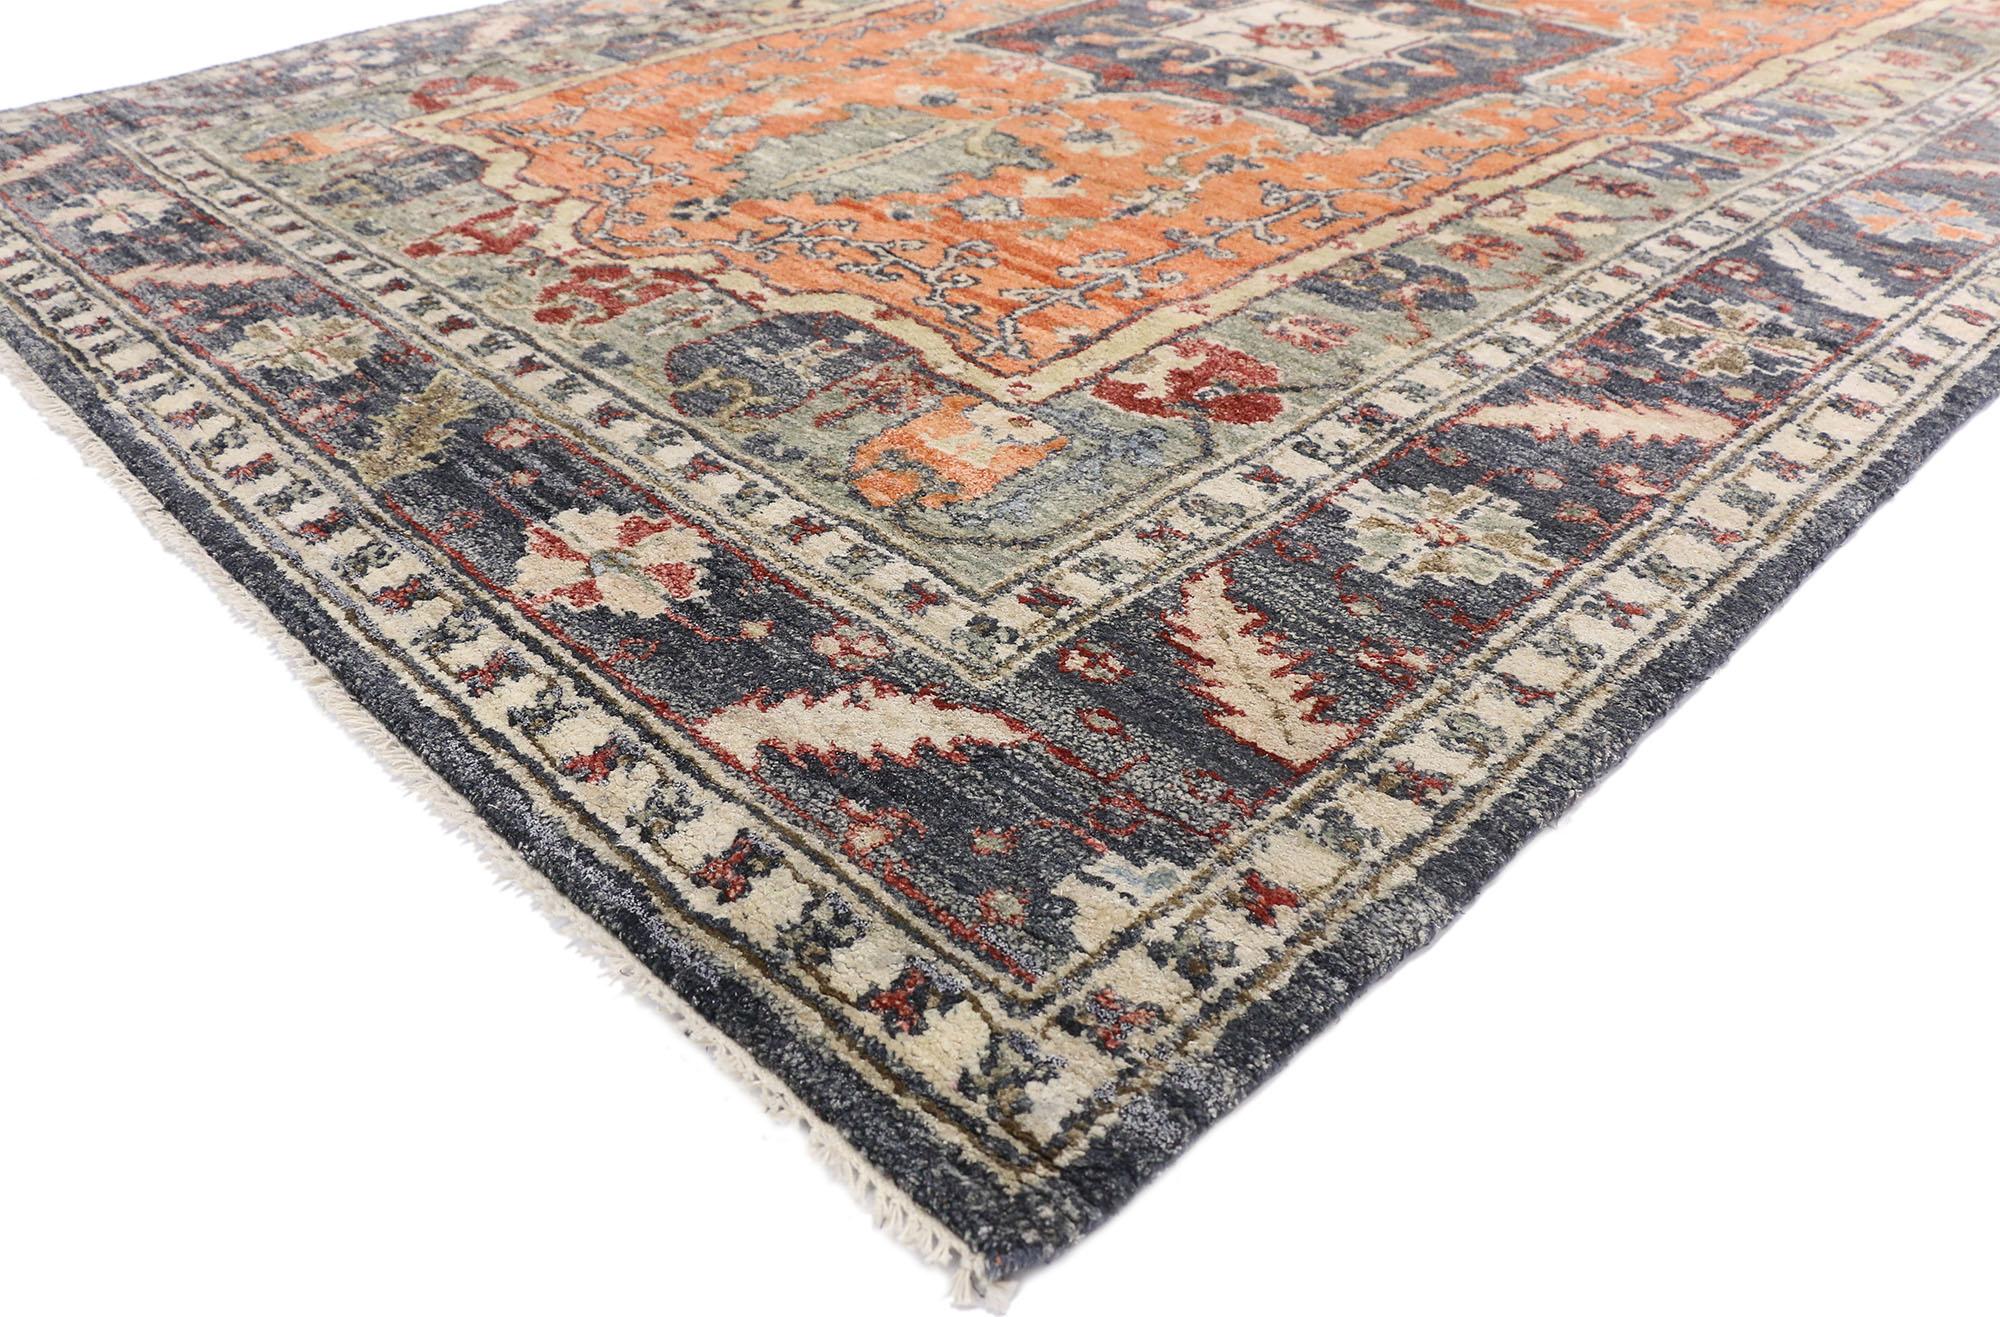 30470, contemporary silk area rug with Heriz pattern and Arts & Craft artisan style. With its colorfully abstract Heriz pattern and fine craftsmanship details, this hand knotted silk contemporary area rug embodies a fine combination of Artisan and